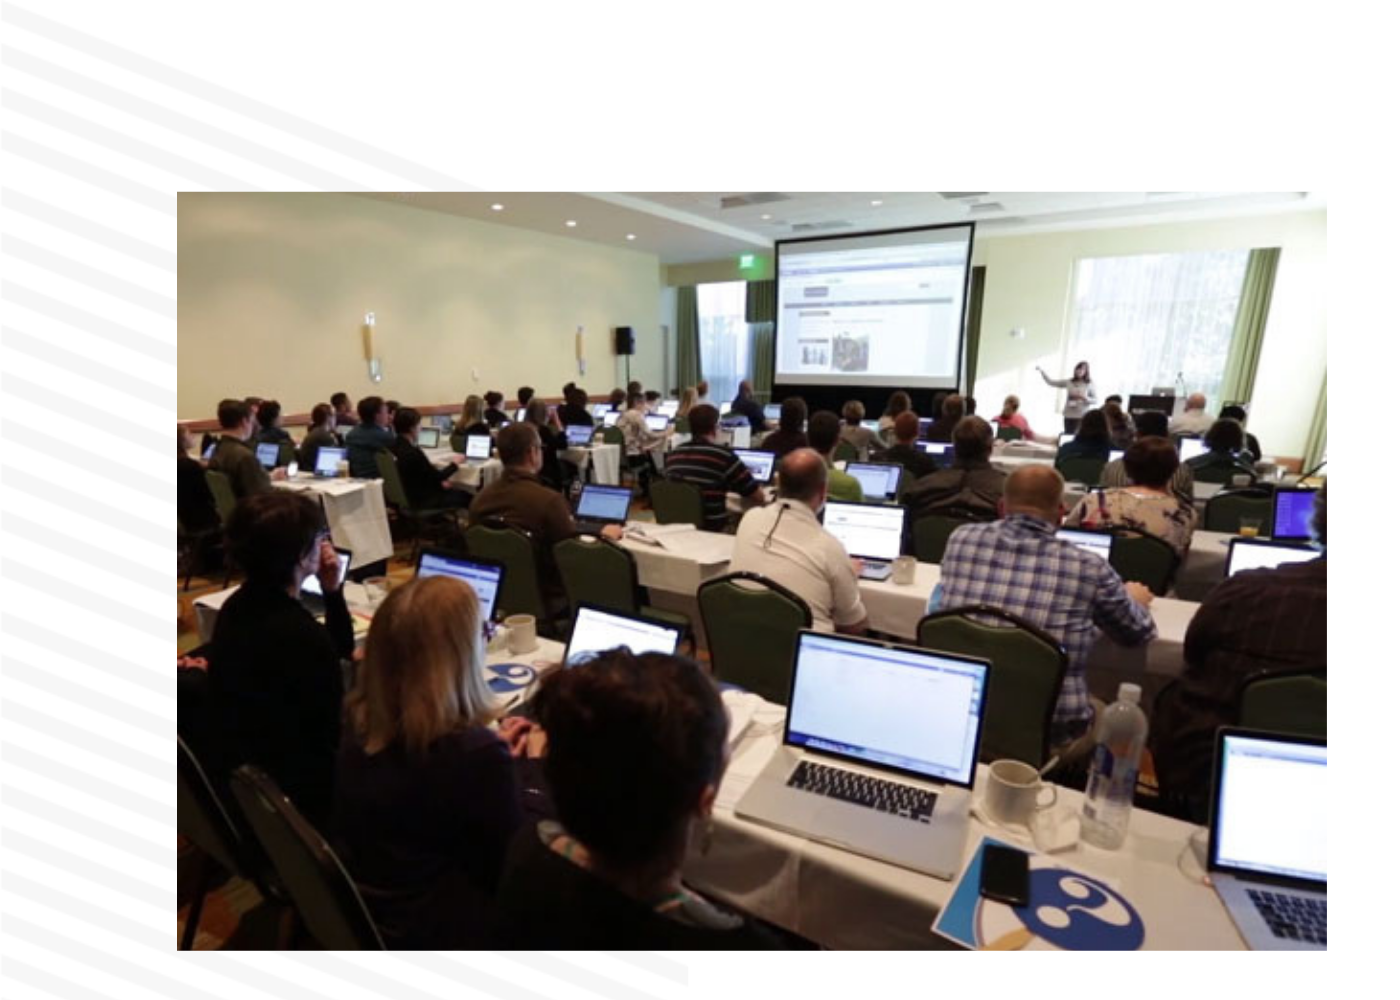 Join other Modern Campus users for training conferences.